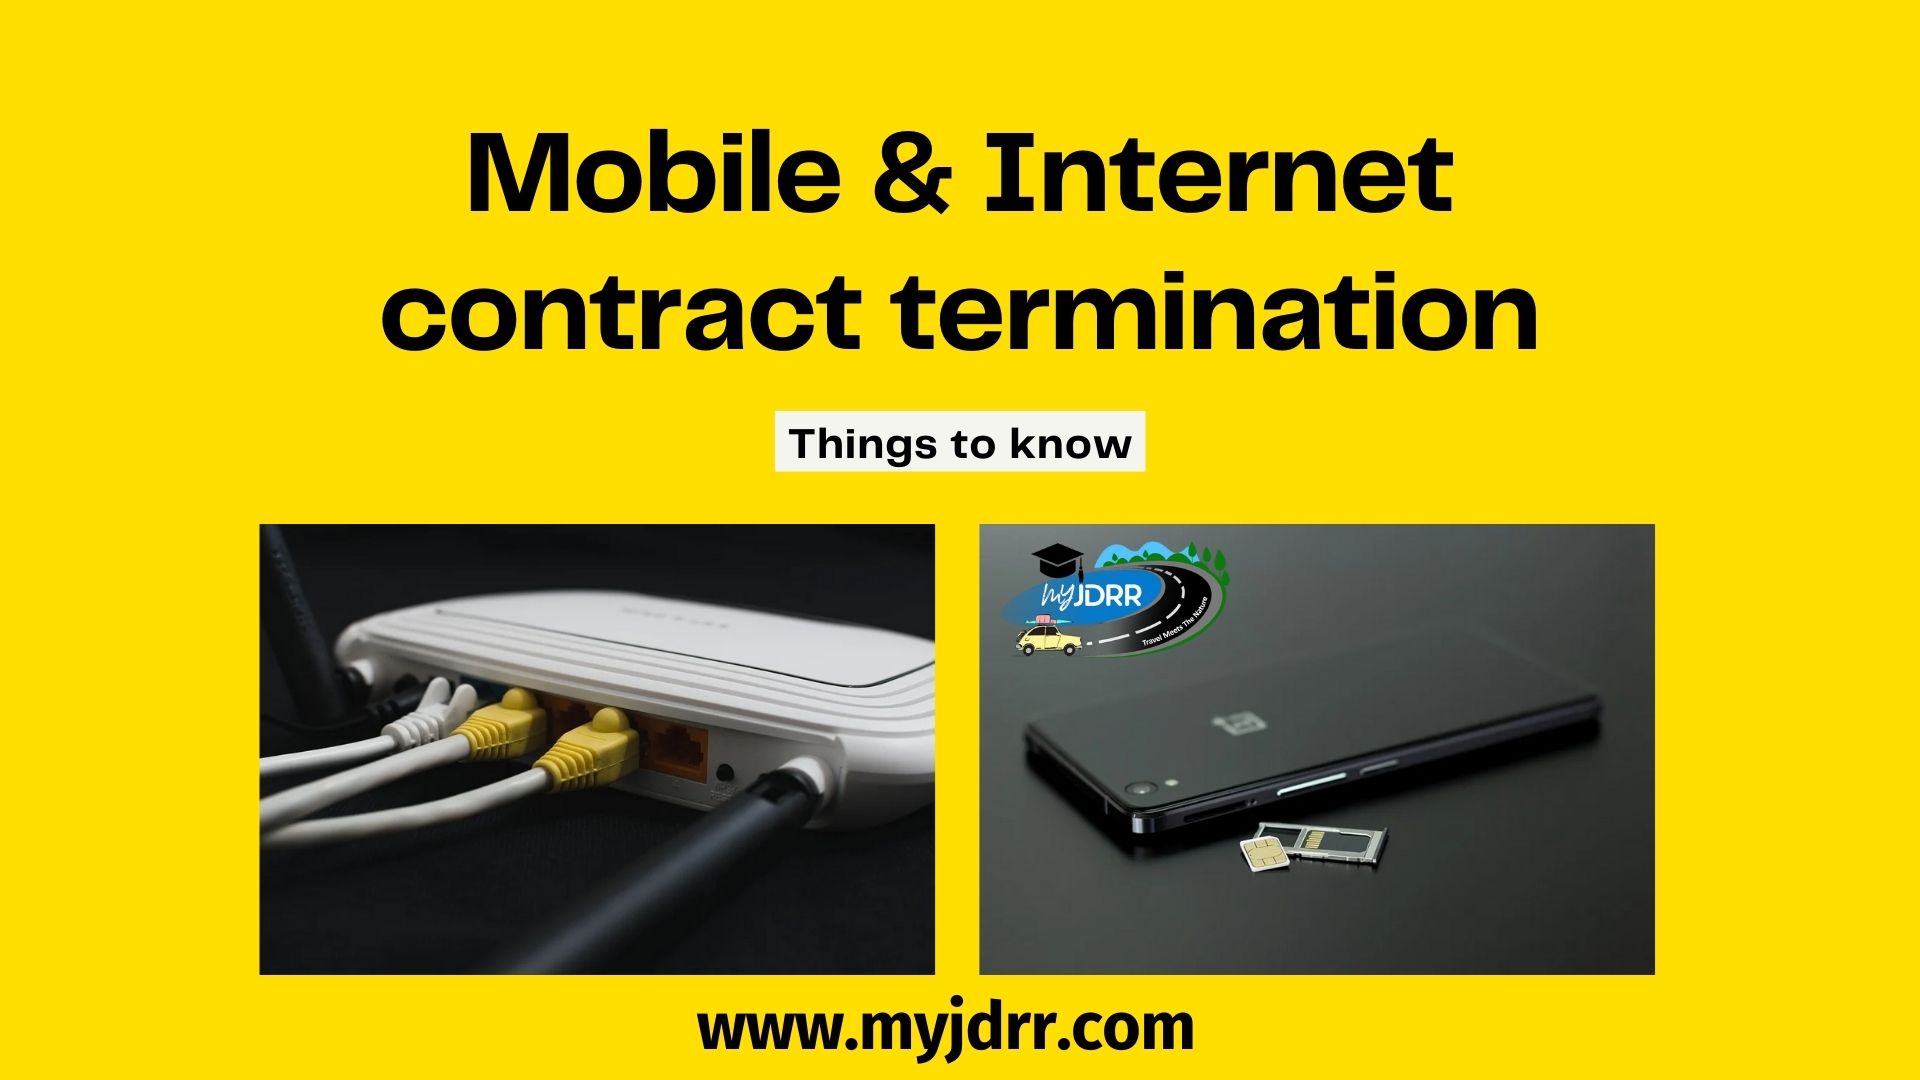 Mobile contract termination and Internet contract termination